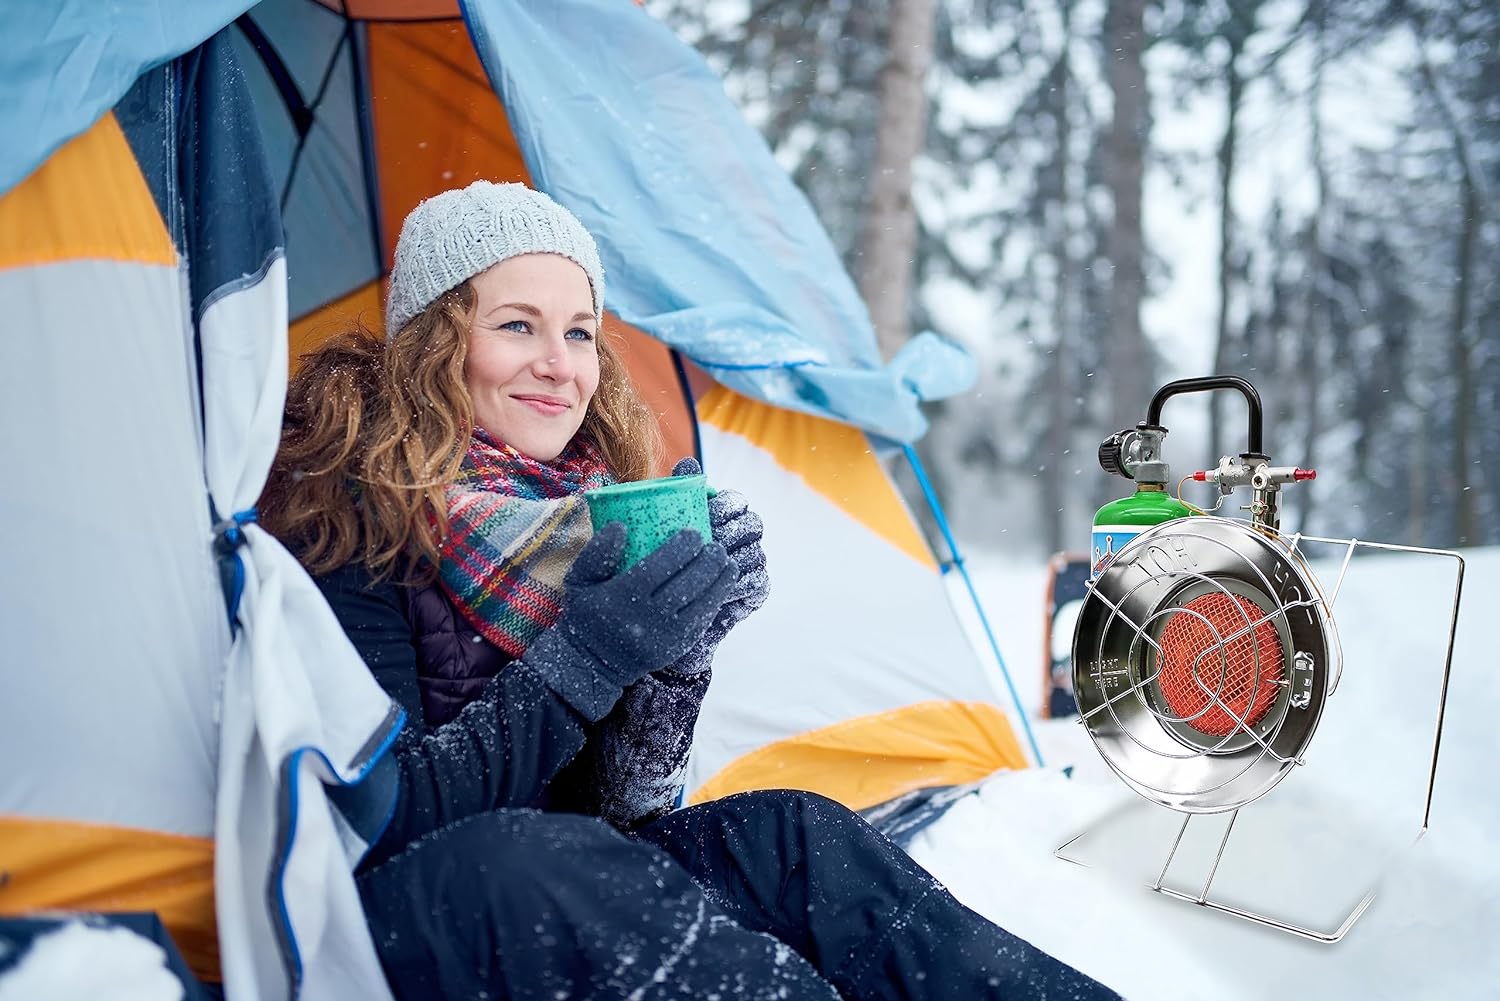 Flame King FK-AD010CGA Multi-Use Portable Propane Heater/Cooker 15,000 BTU for Camping, Ice Fishing, and Backpacking Trips, Silver - Flame King Propane Heater/Cooker Review